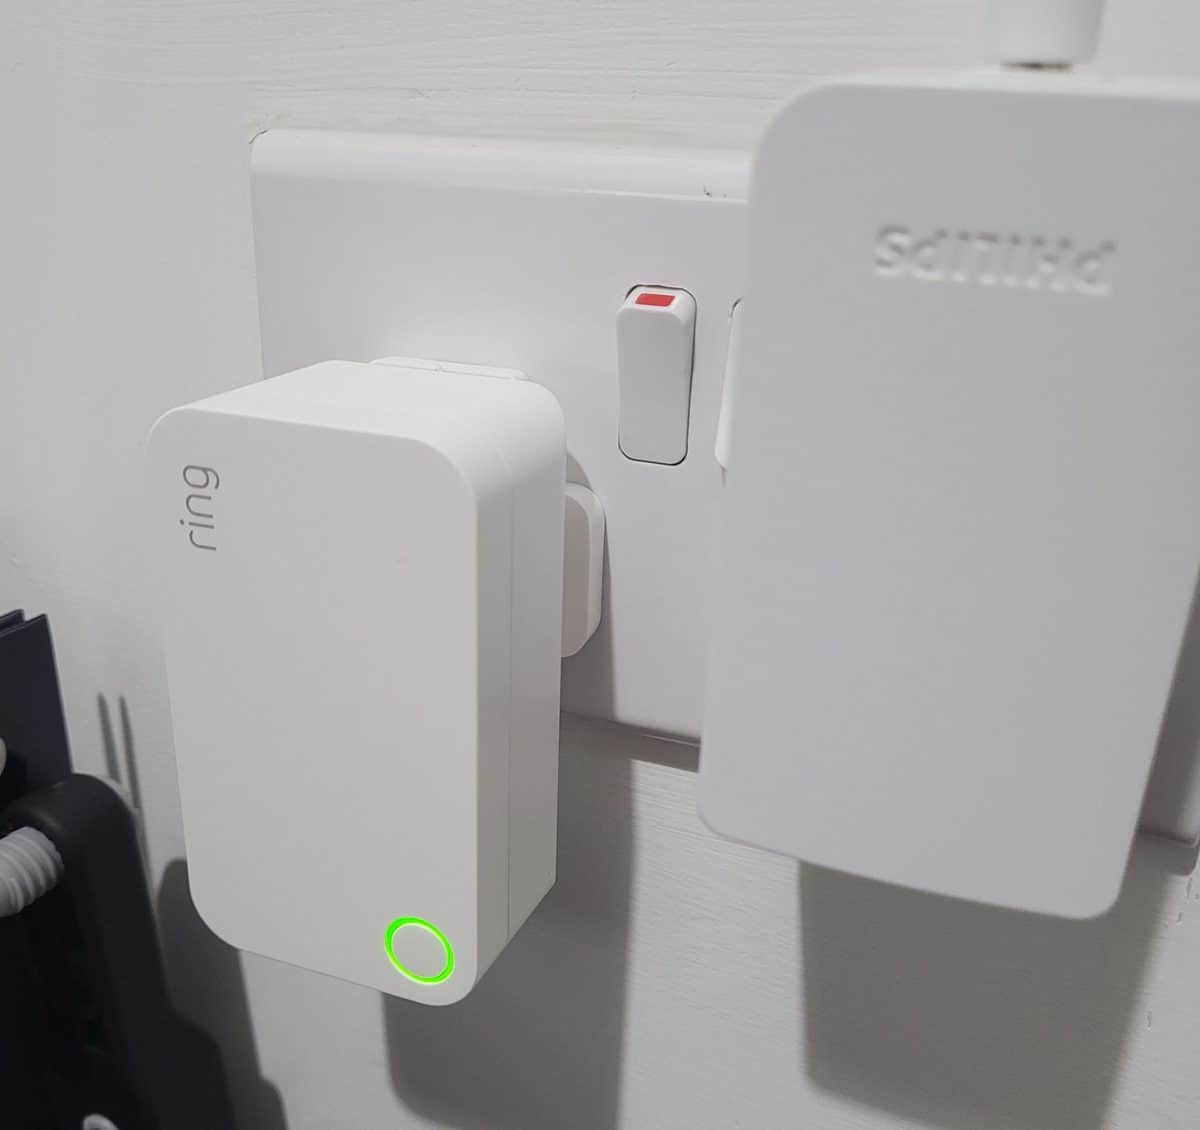 Why Your Ring Sensor Keeps Going Offline (& How To Fix It) Smart Home